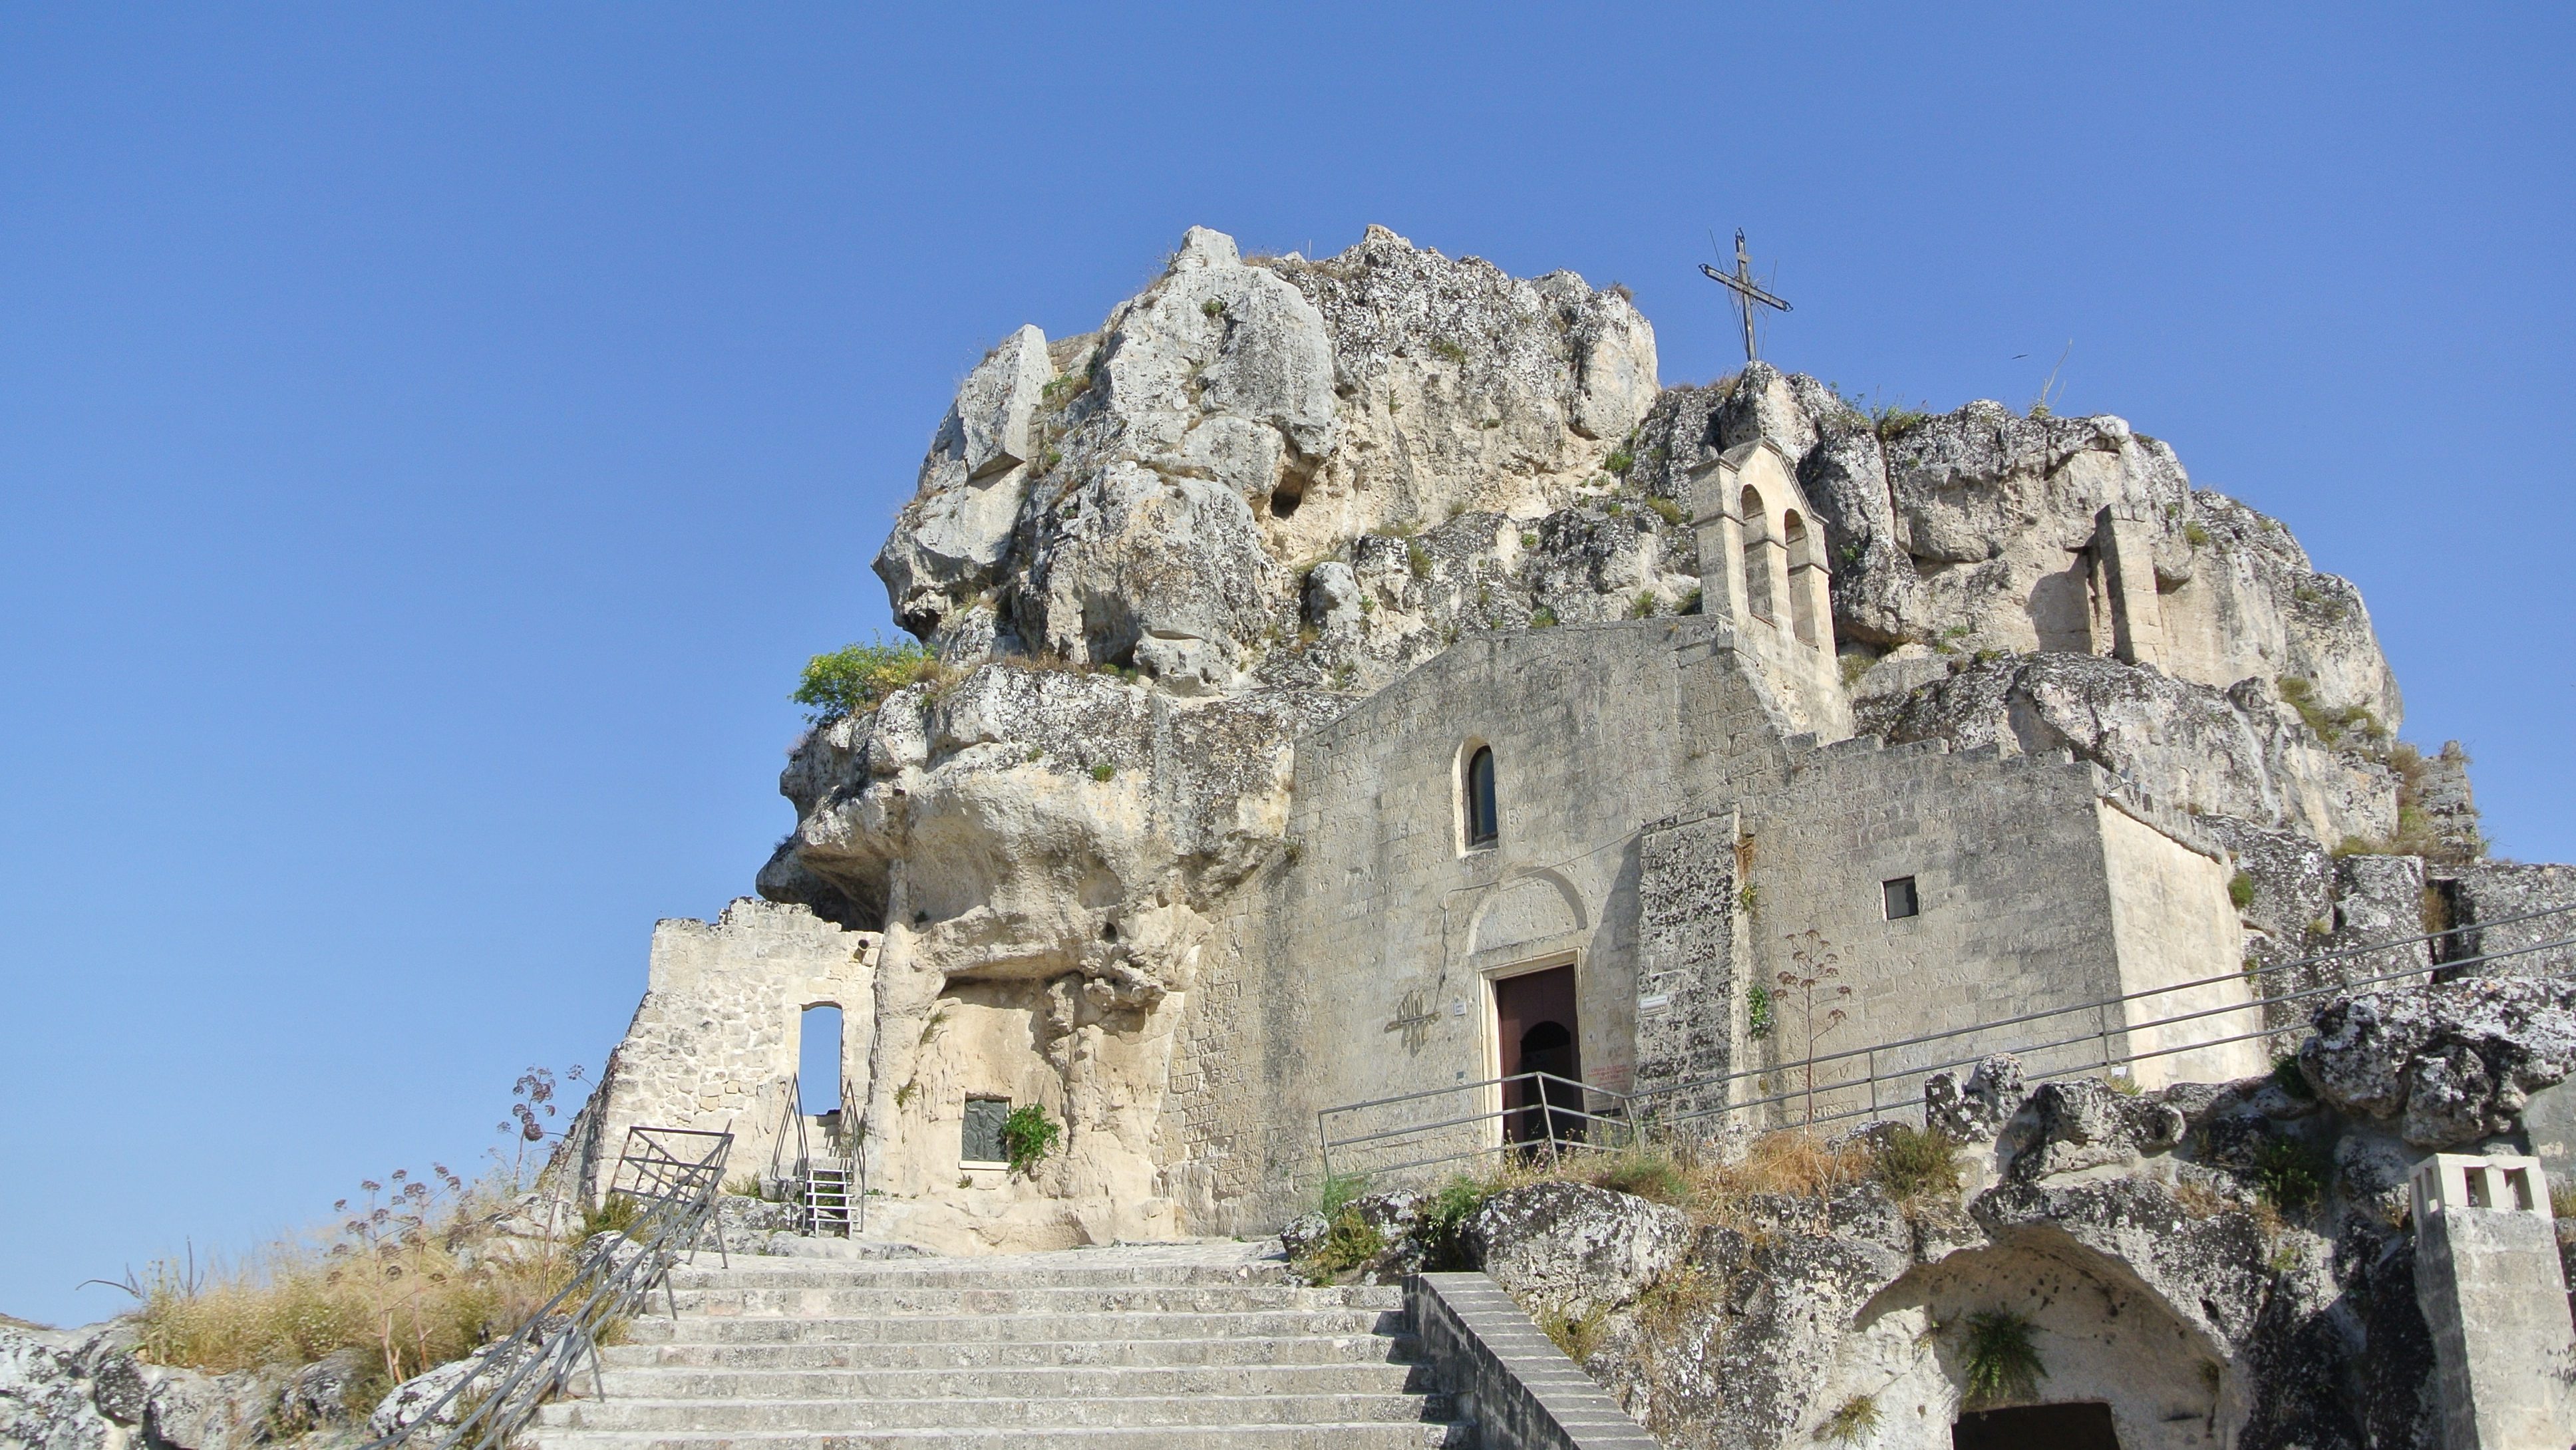 A church cut into the rock in Matera, Italy